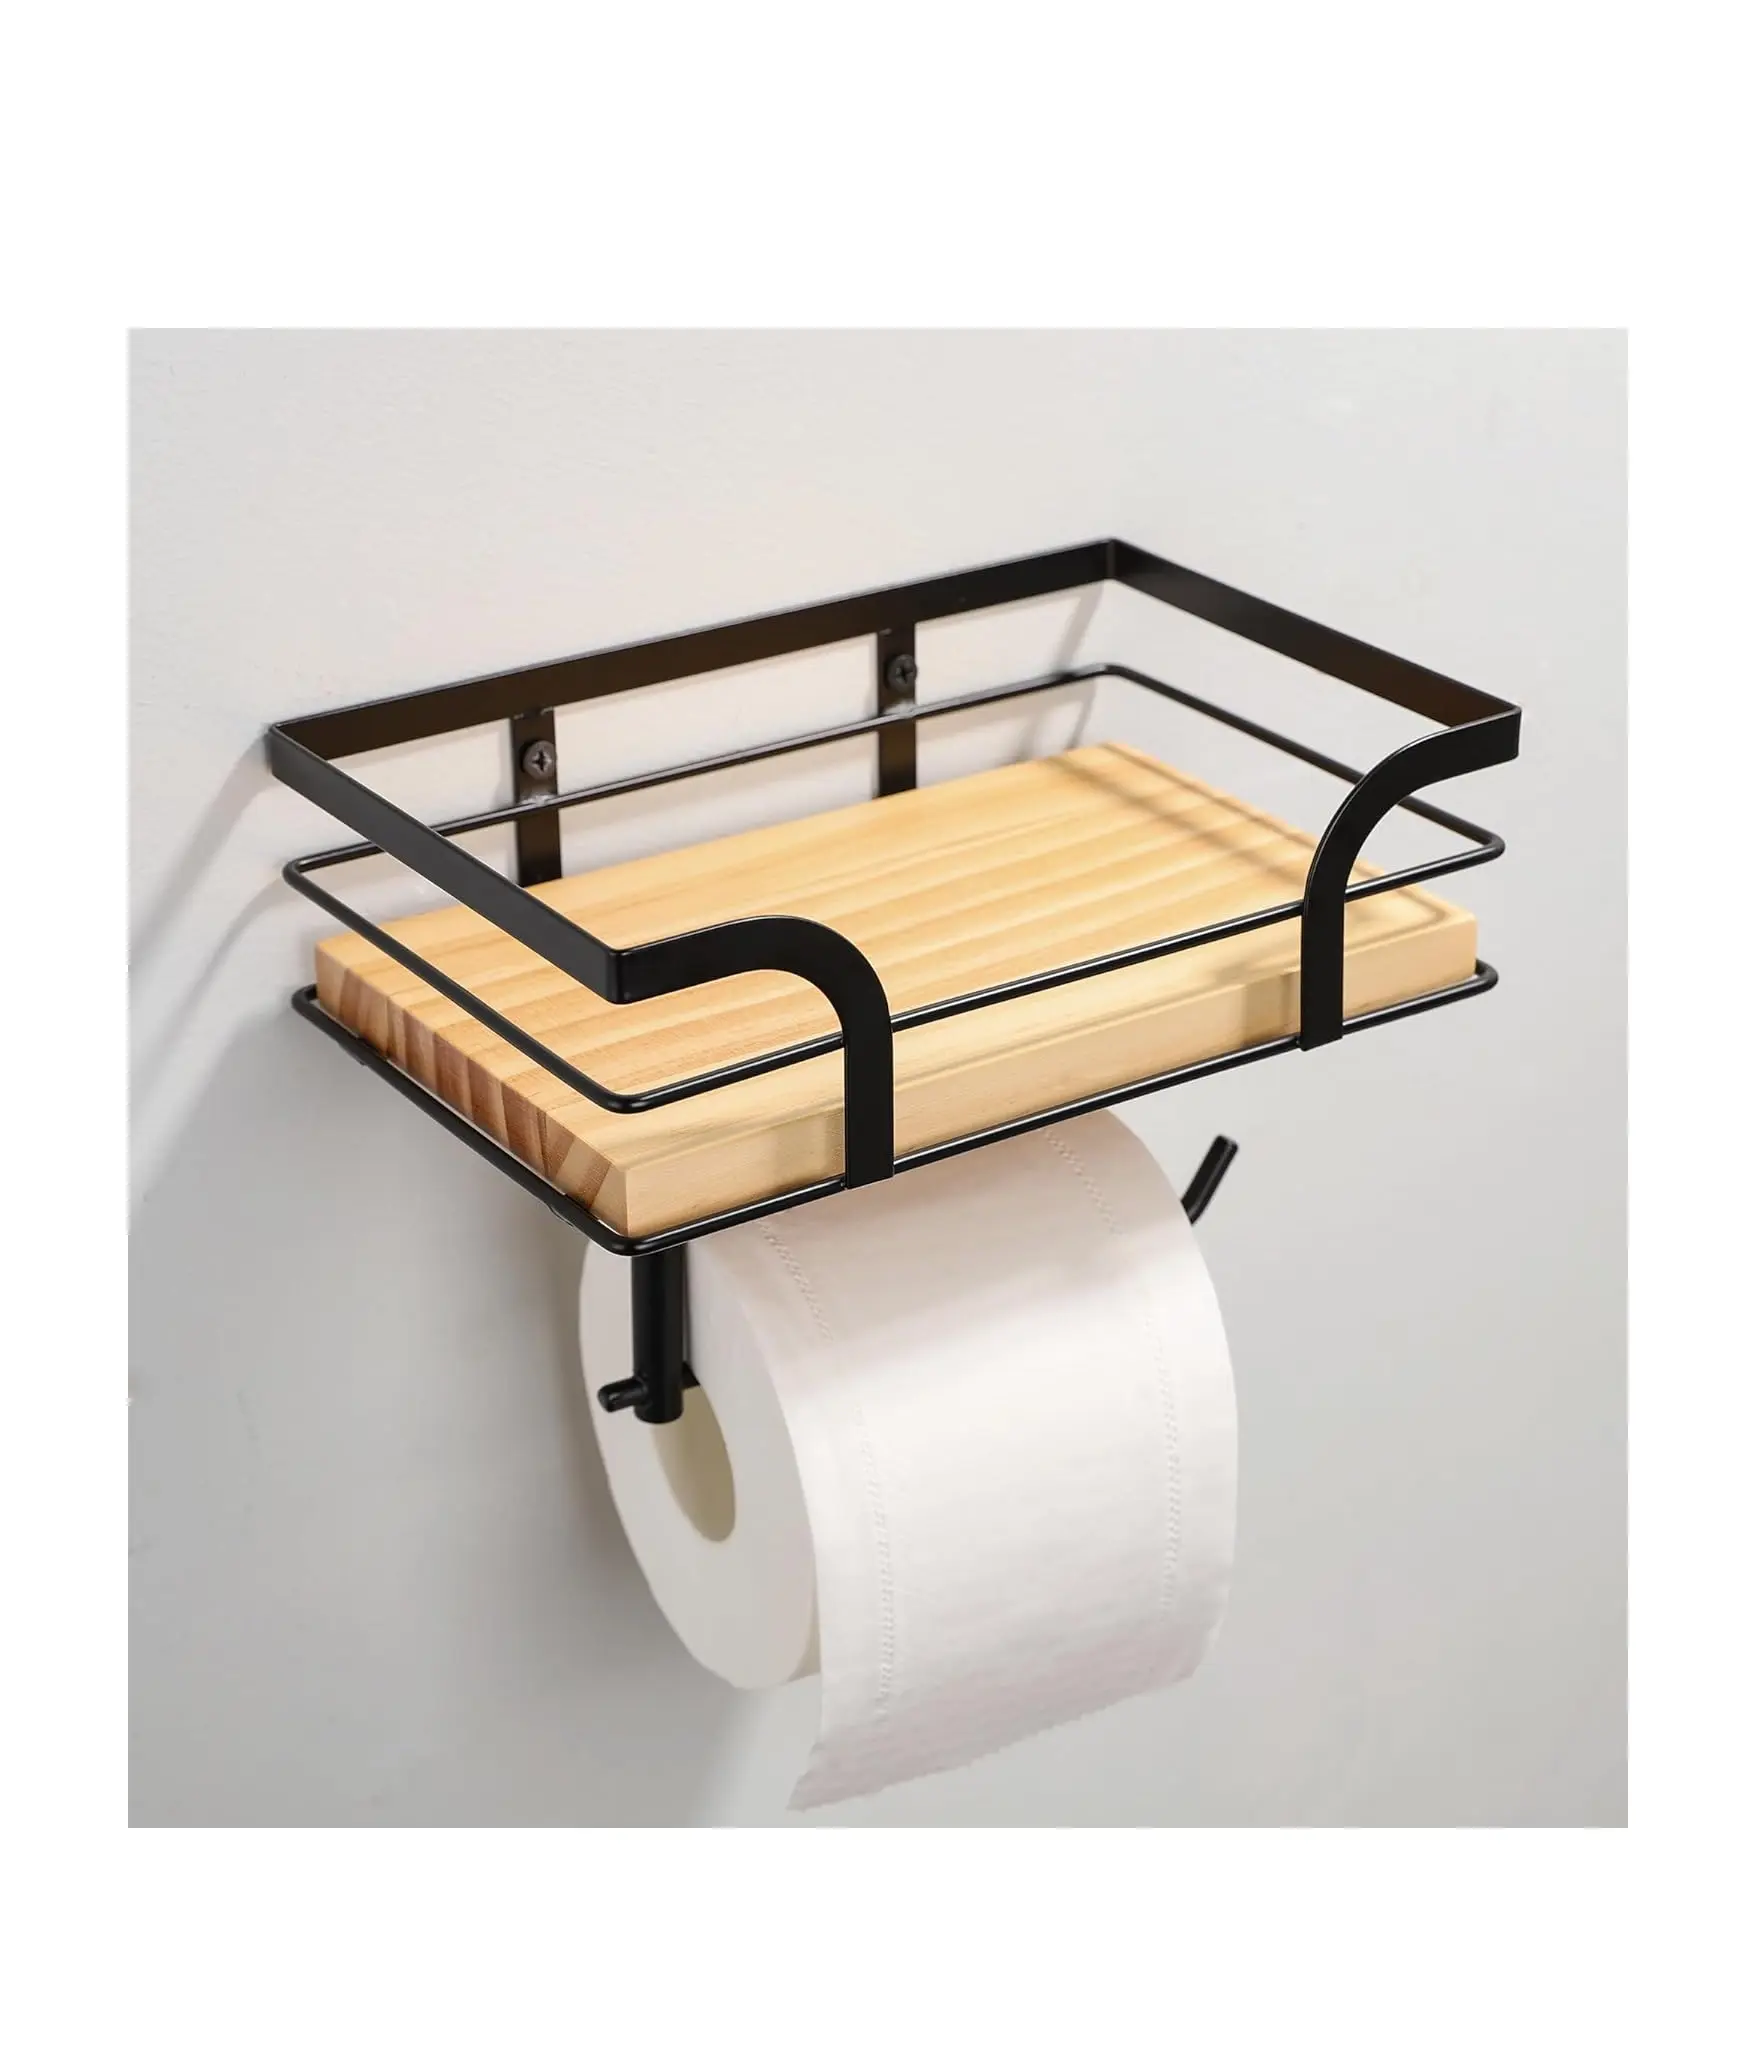 Toilet Paper Holder - Roll Holder with Shelf Bathroom Warm Organizer Decor for Wipes & Cell Phone & Reading Light Brown